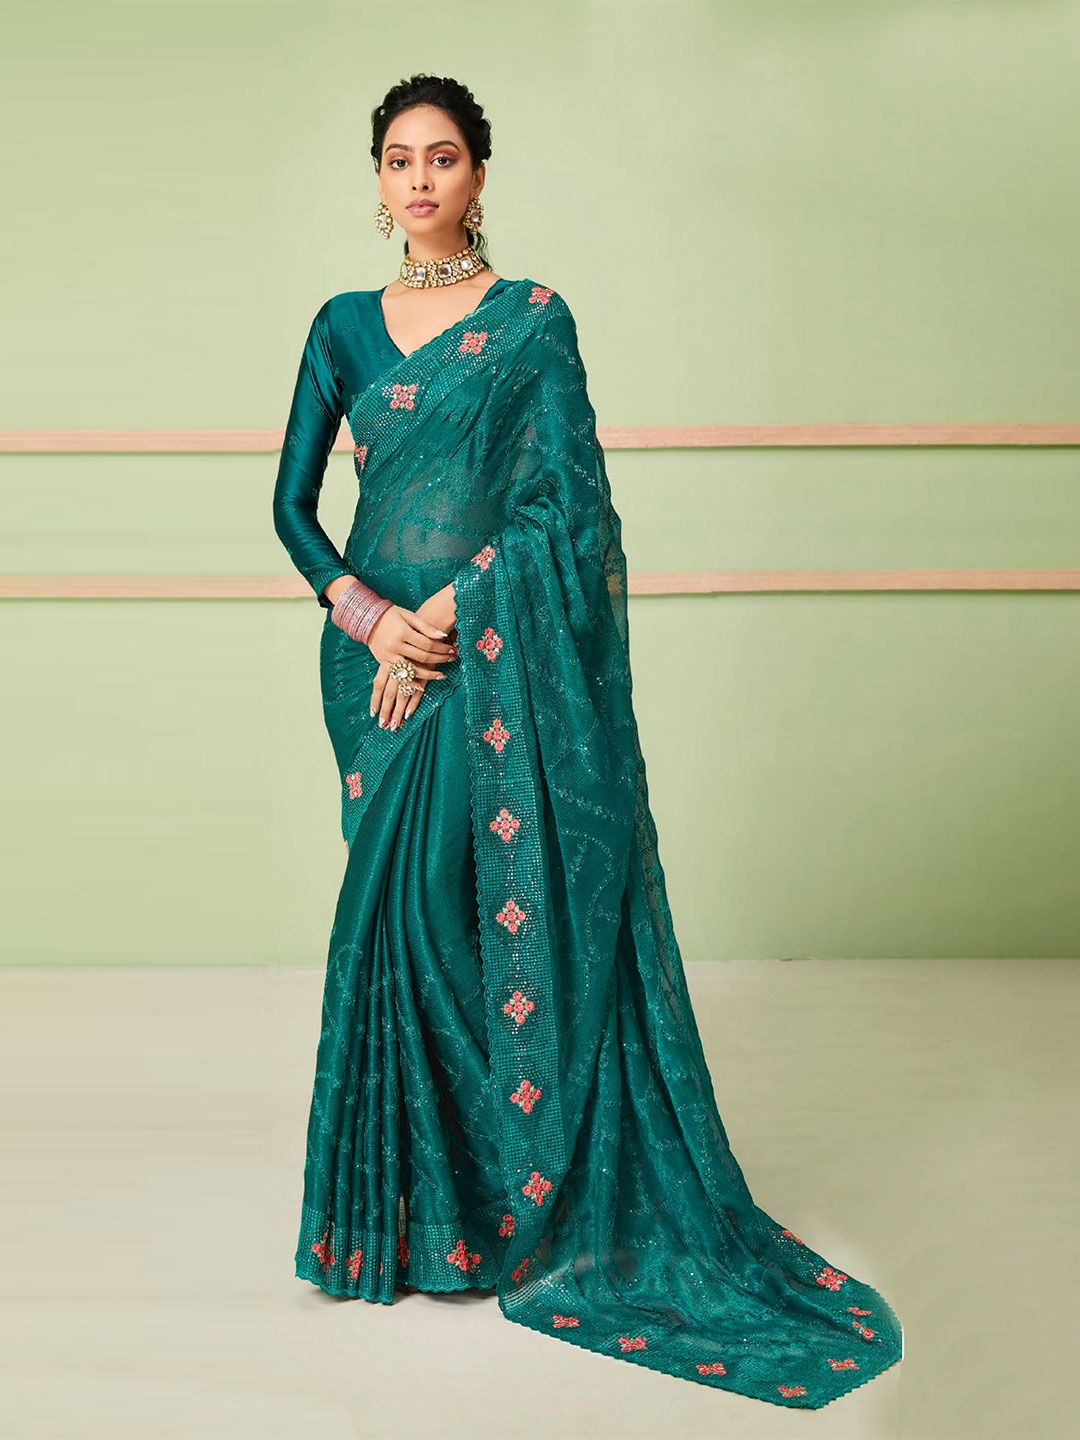 

VIRICA Embellished Sequinned Pure Chiffon Bagh Saree, Teal